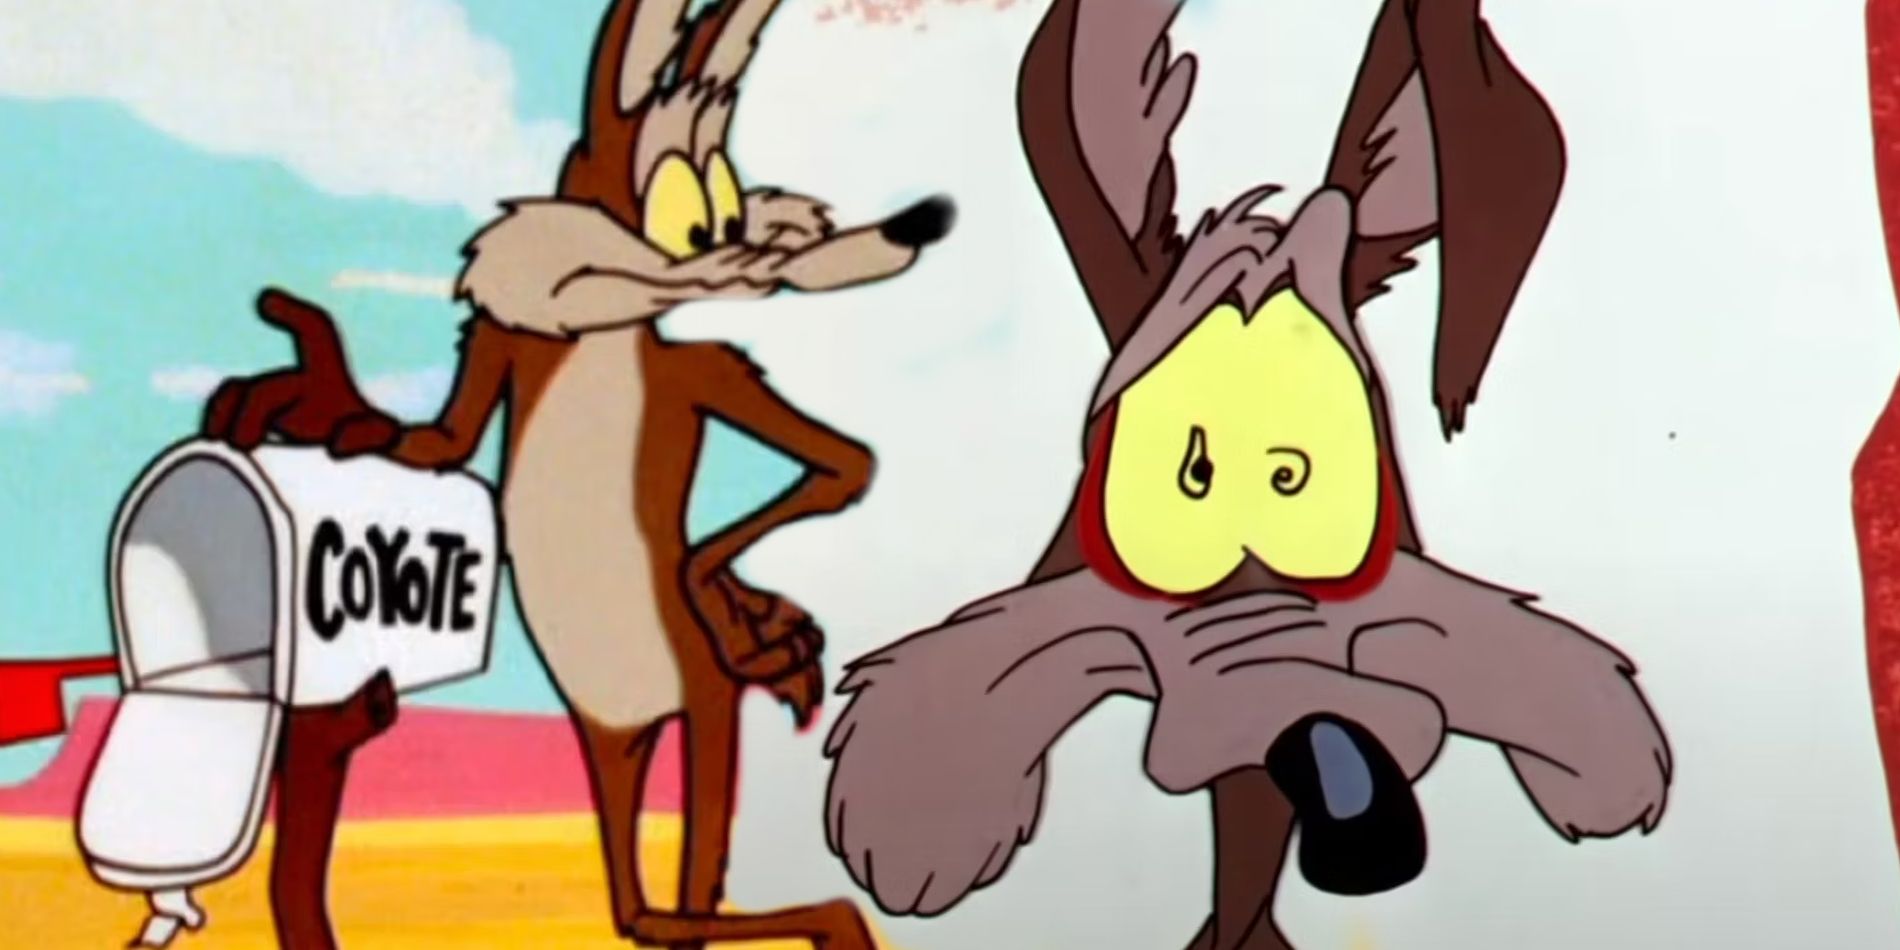 Wile E Coyote Leaning on a Mailbox Next to Wile E Coyote Looking Scared in Looney Tunes